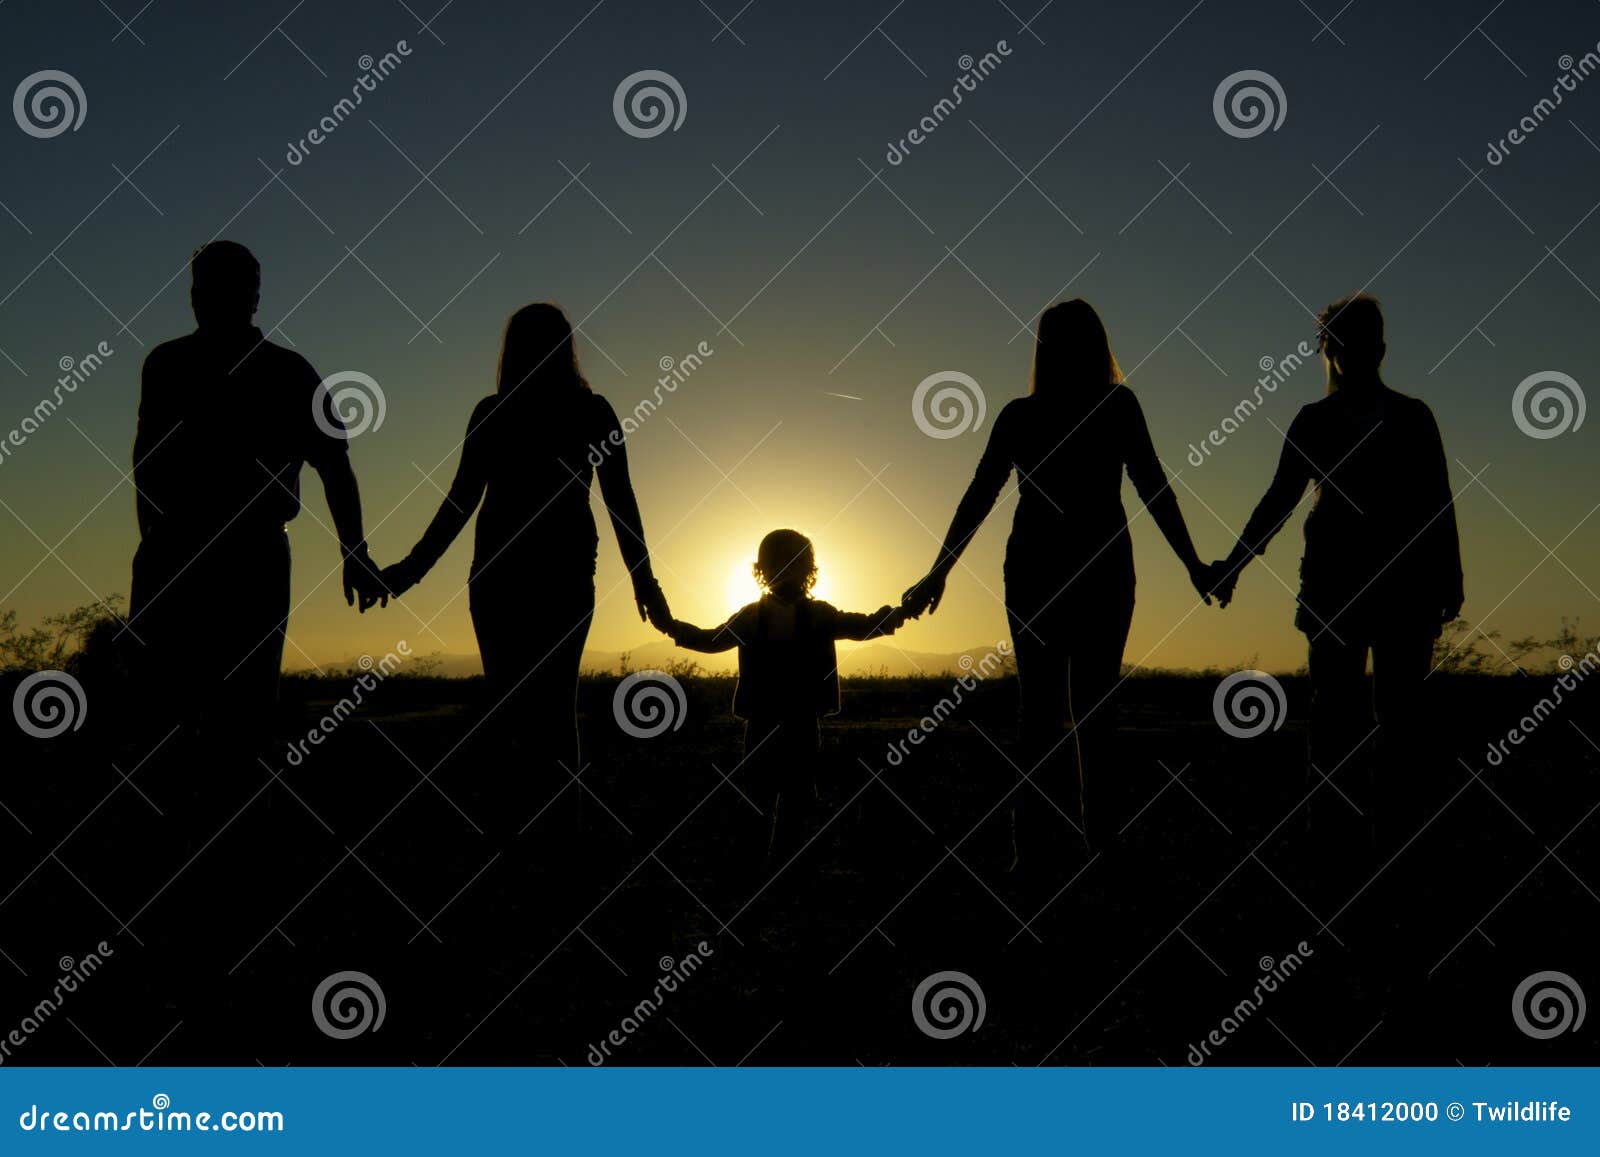 family togetherness and unity in sunset